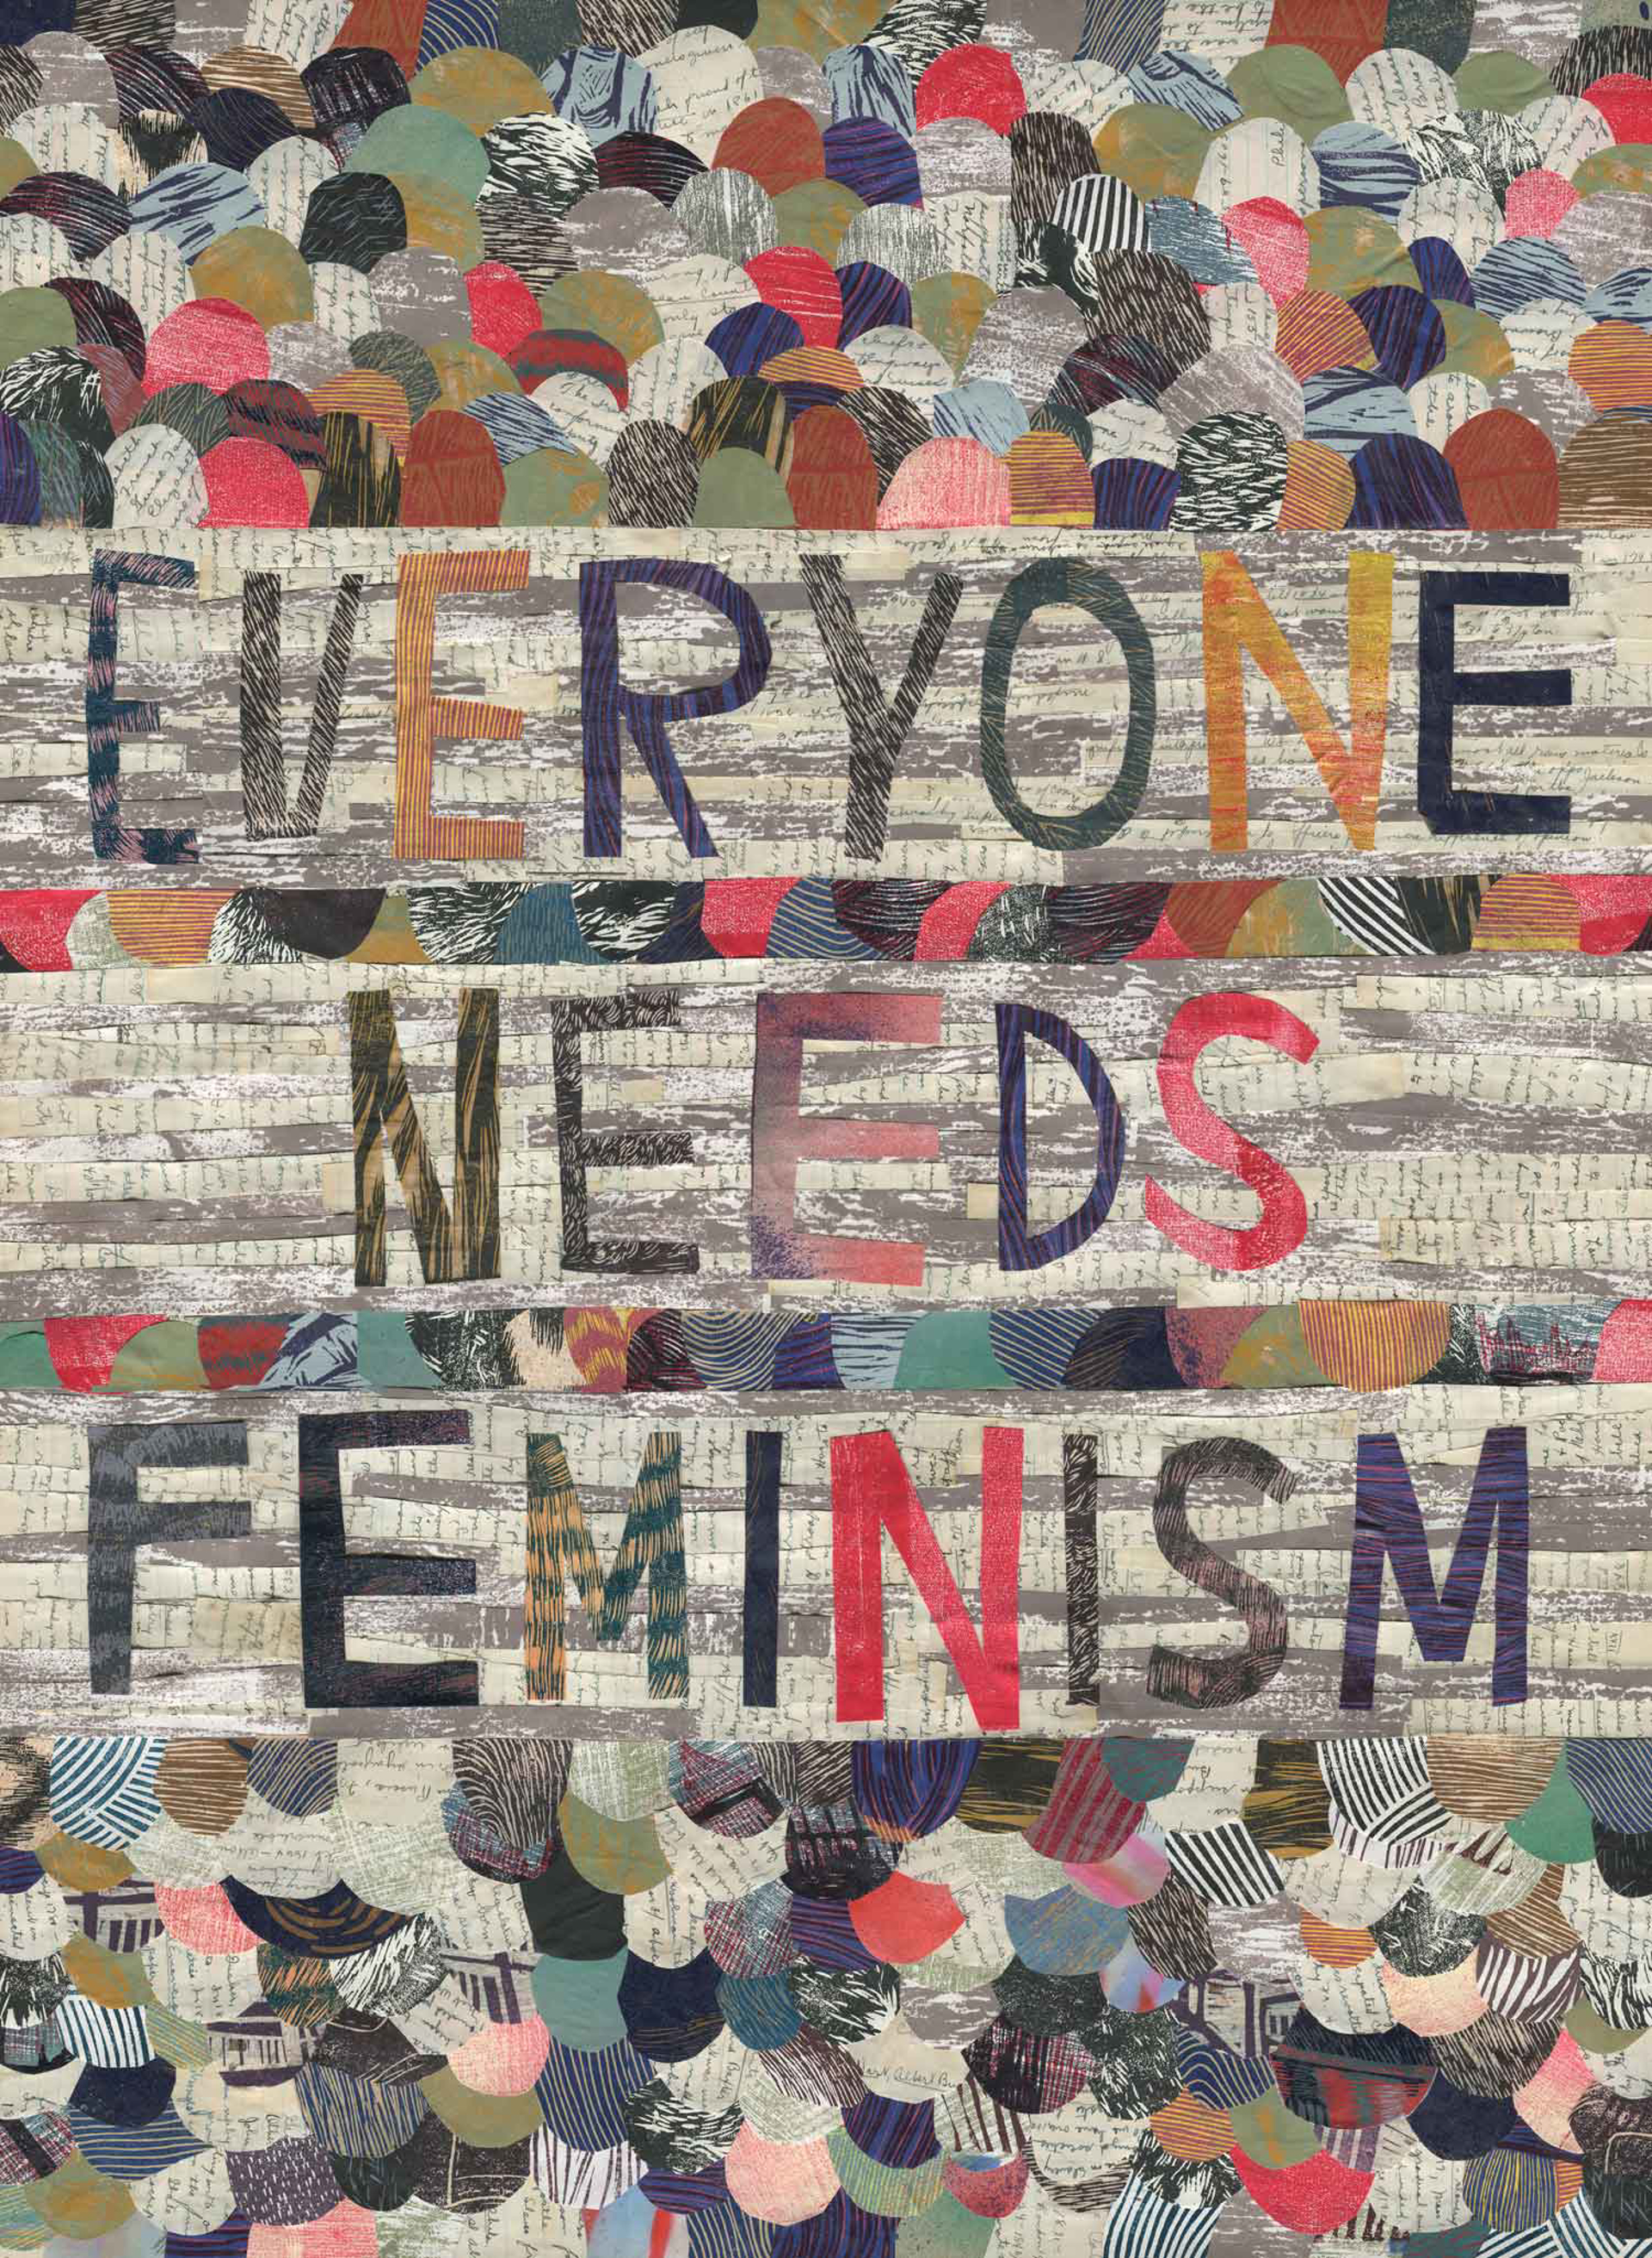 Everyone Needs Feminism by Meredith Stern